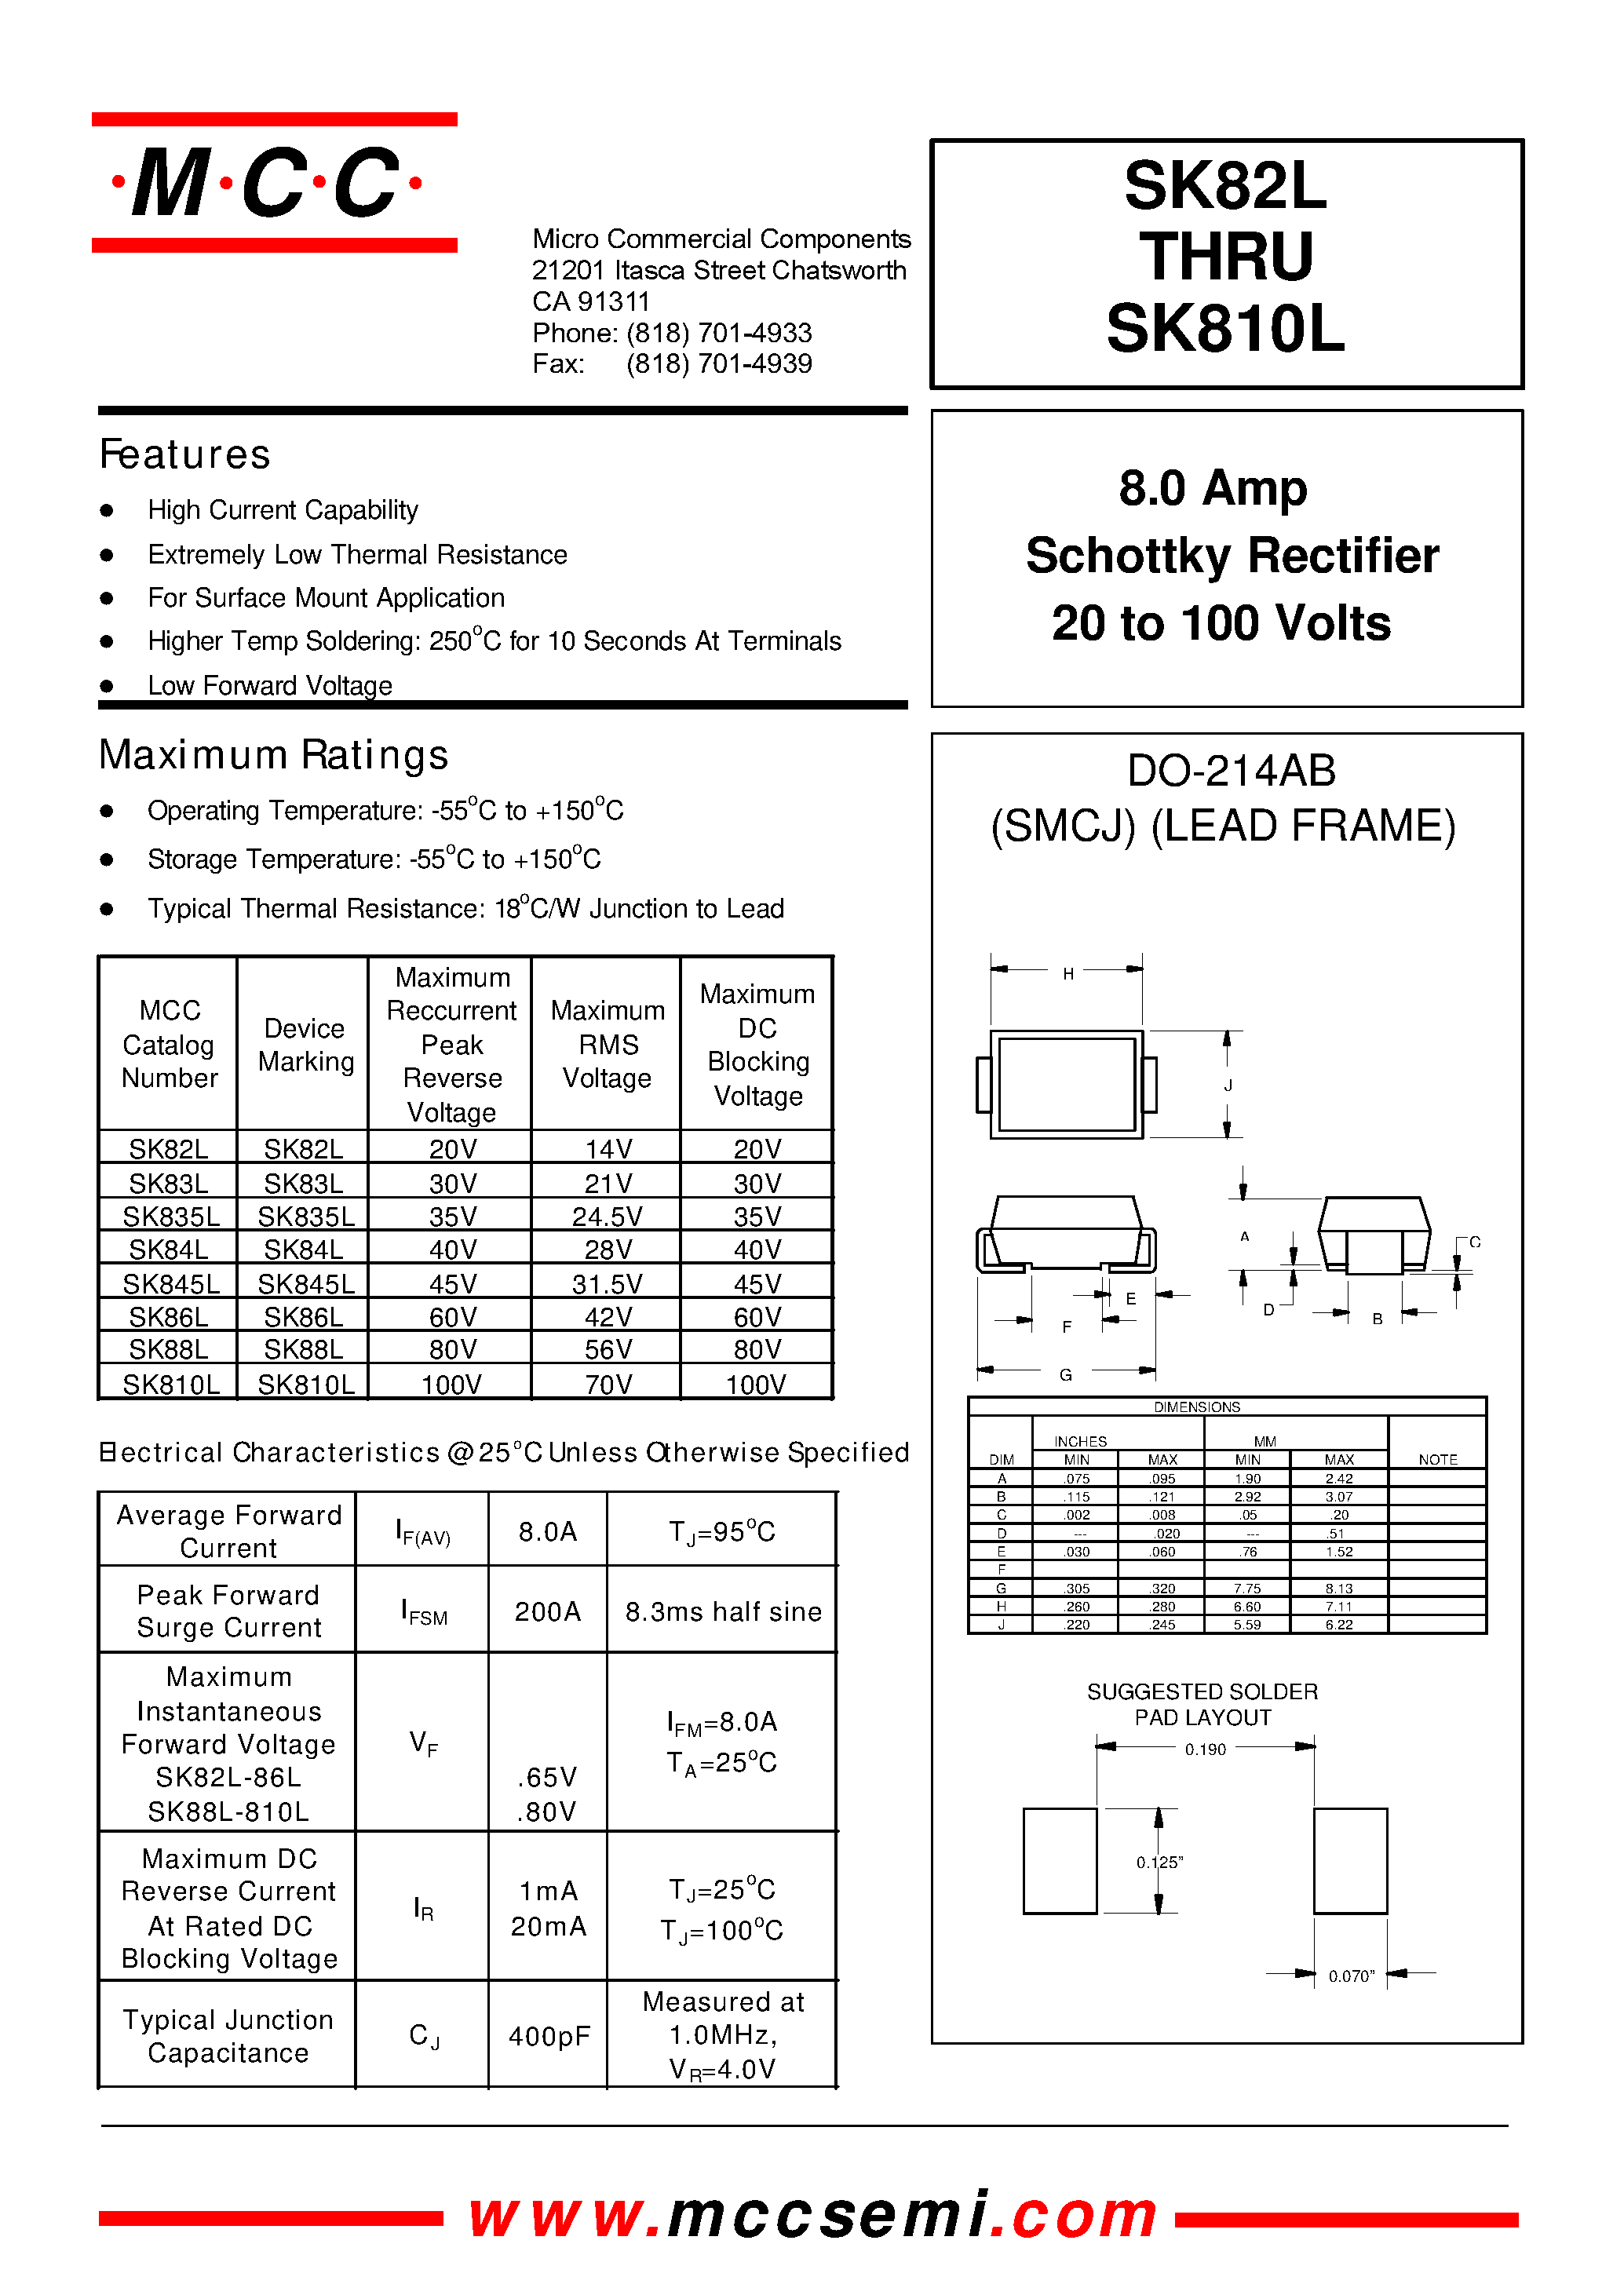 Datasheet SK84L - 8.0 Amp Schottky Rectifier 20 to 100 Volts page 1